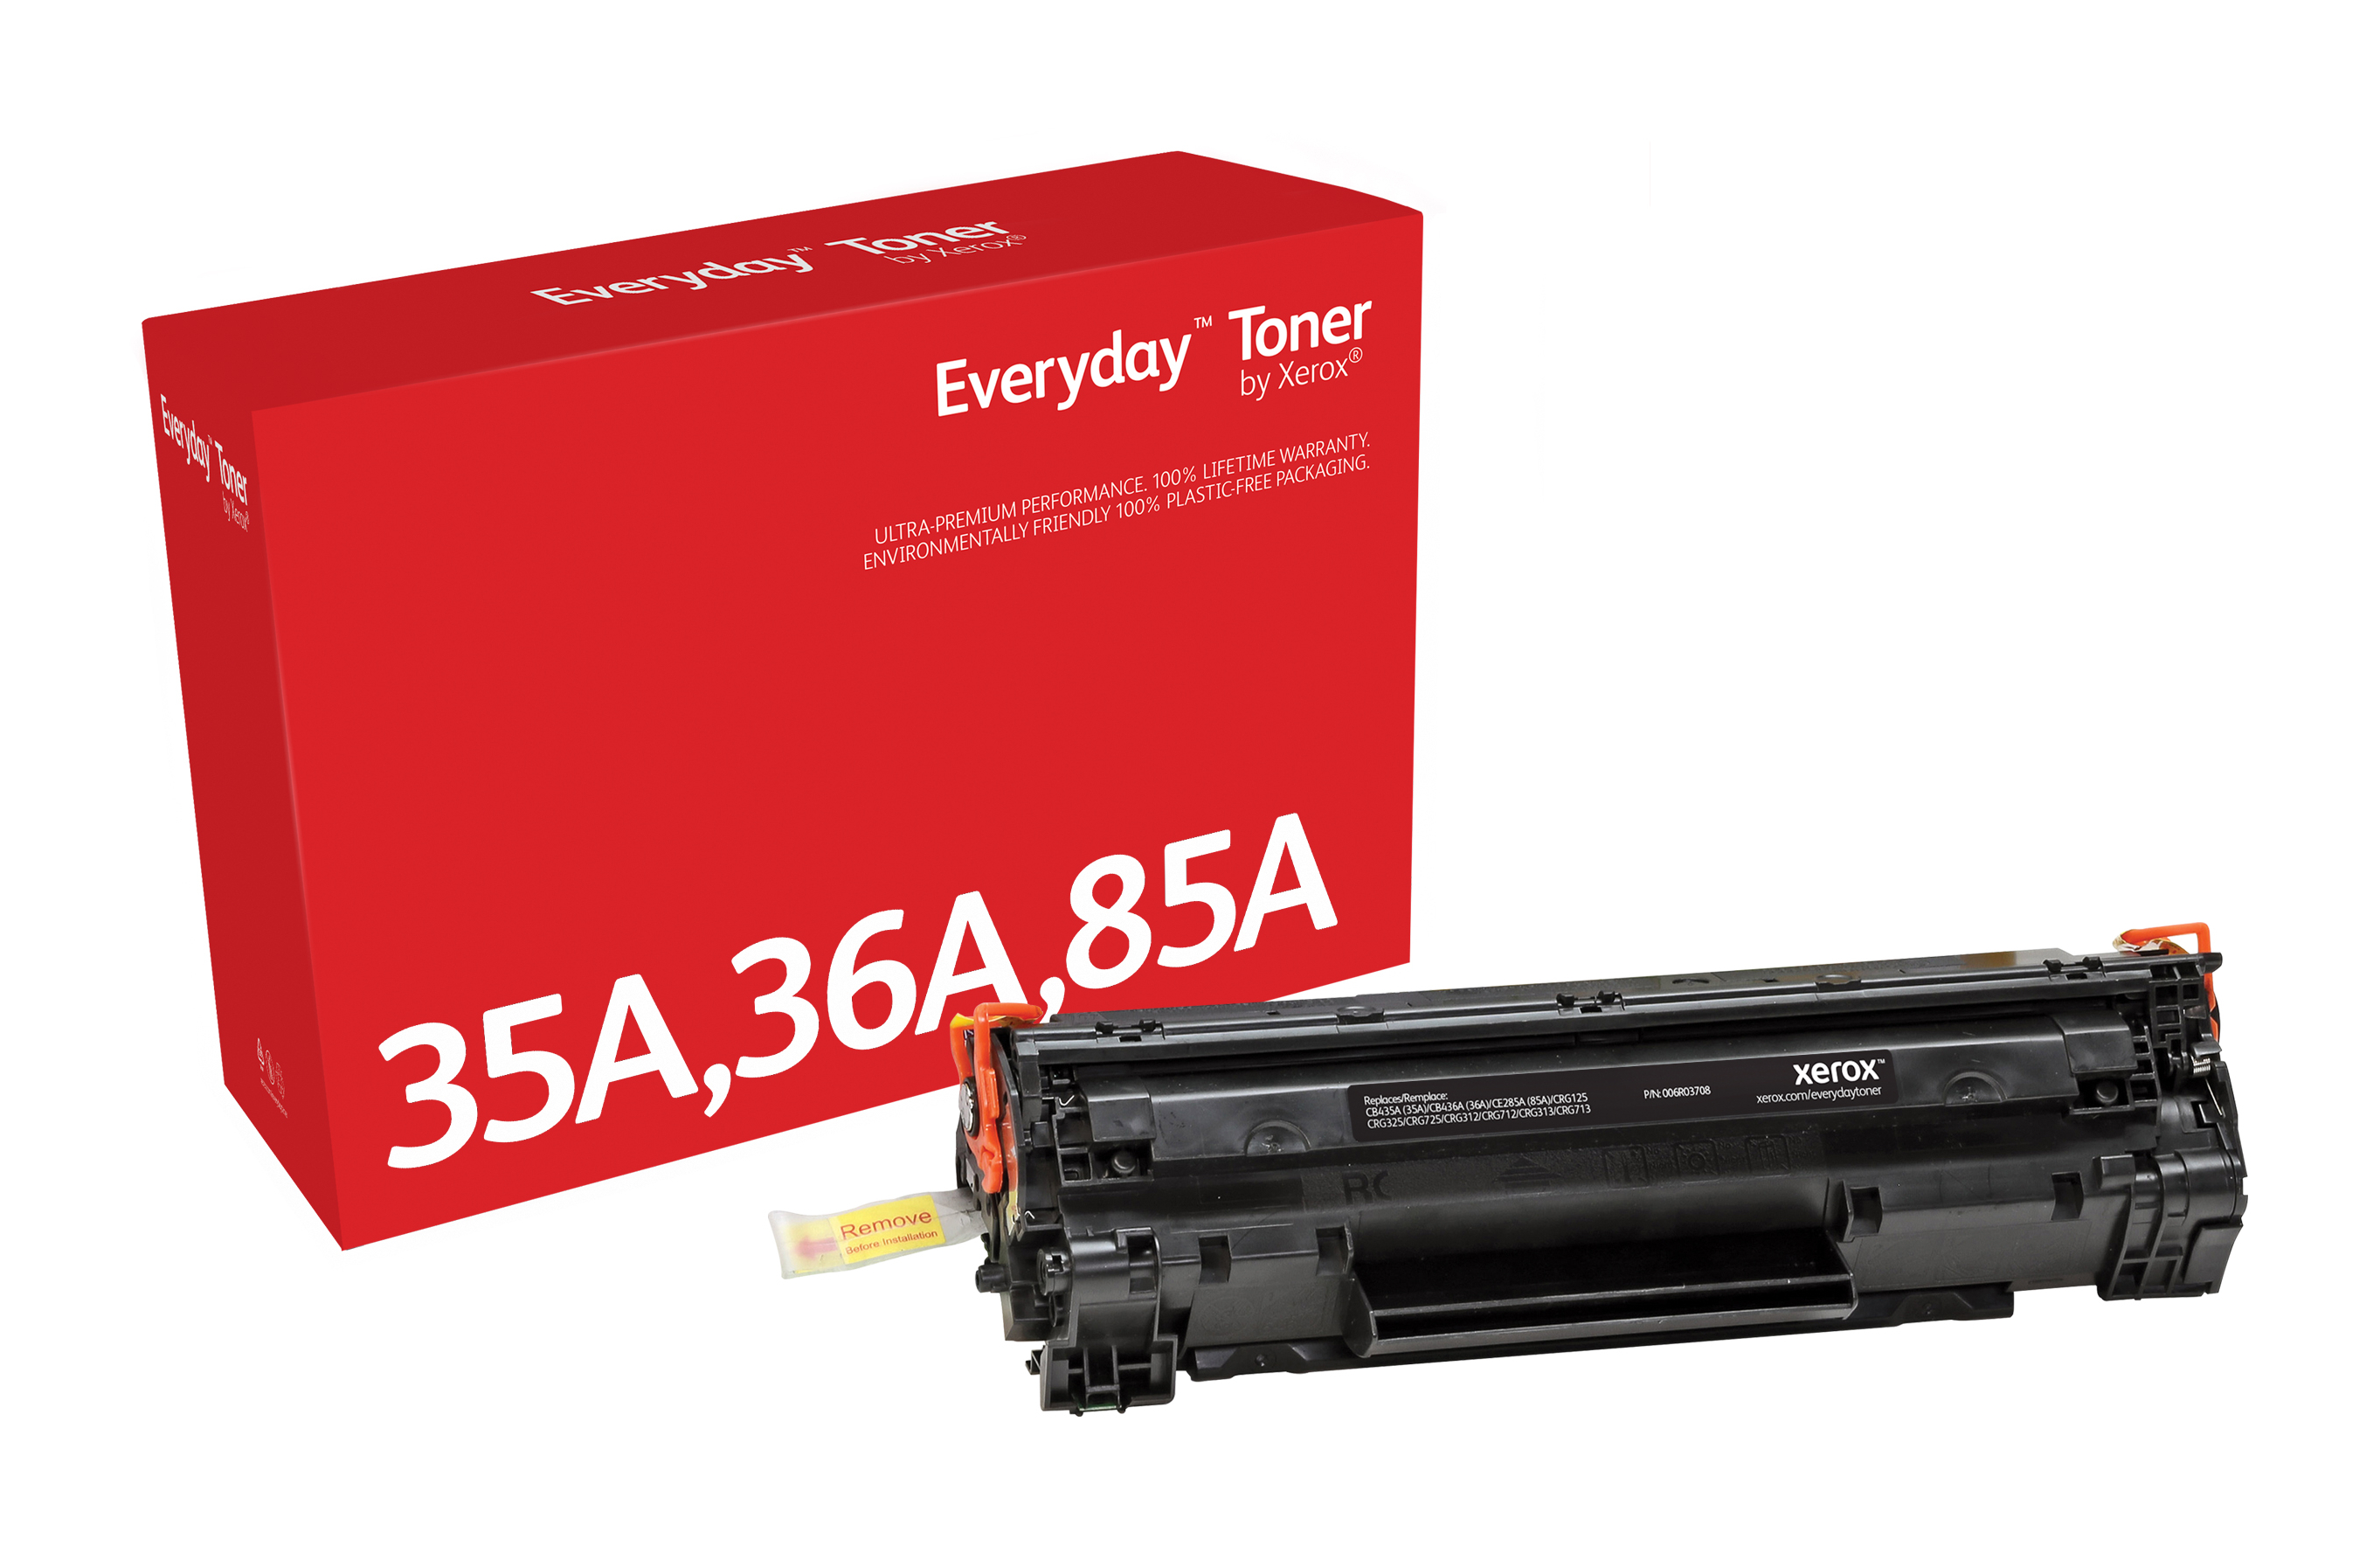 Everyday Black Toner compatible with HP 35A/ 36A/ 85A/ (CB435A/ CB436A/  CE285A), Standard Yield 006R03708 by Xerox